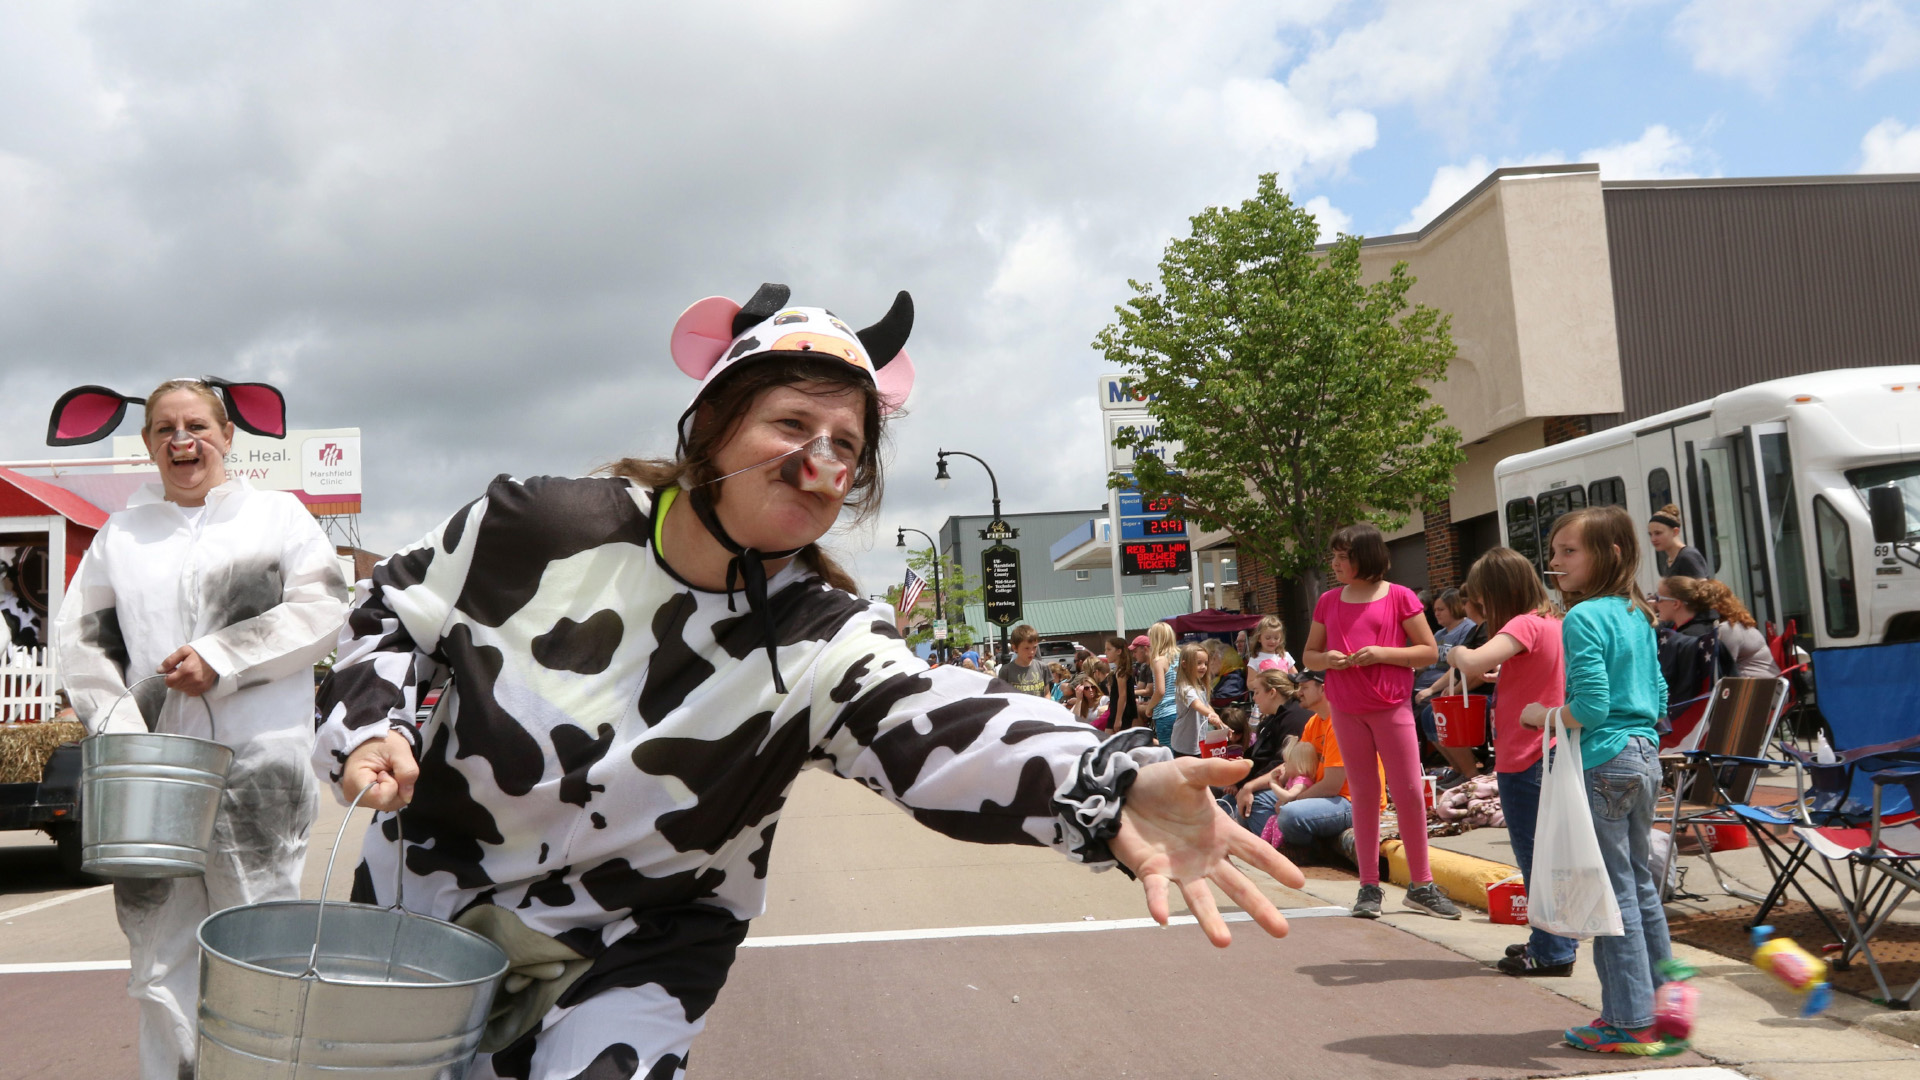 What you need to know about Dairyfest: Dairyfest Parade Marshfield Wisconsin